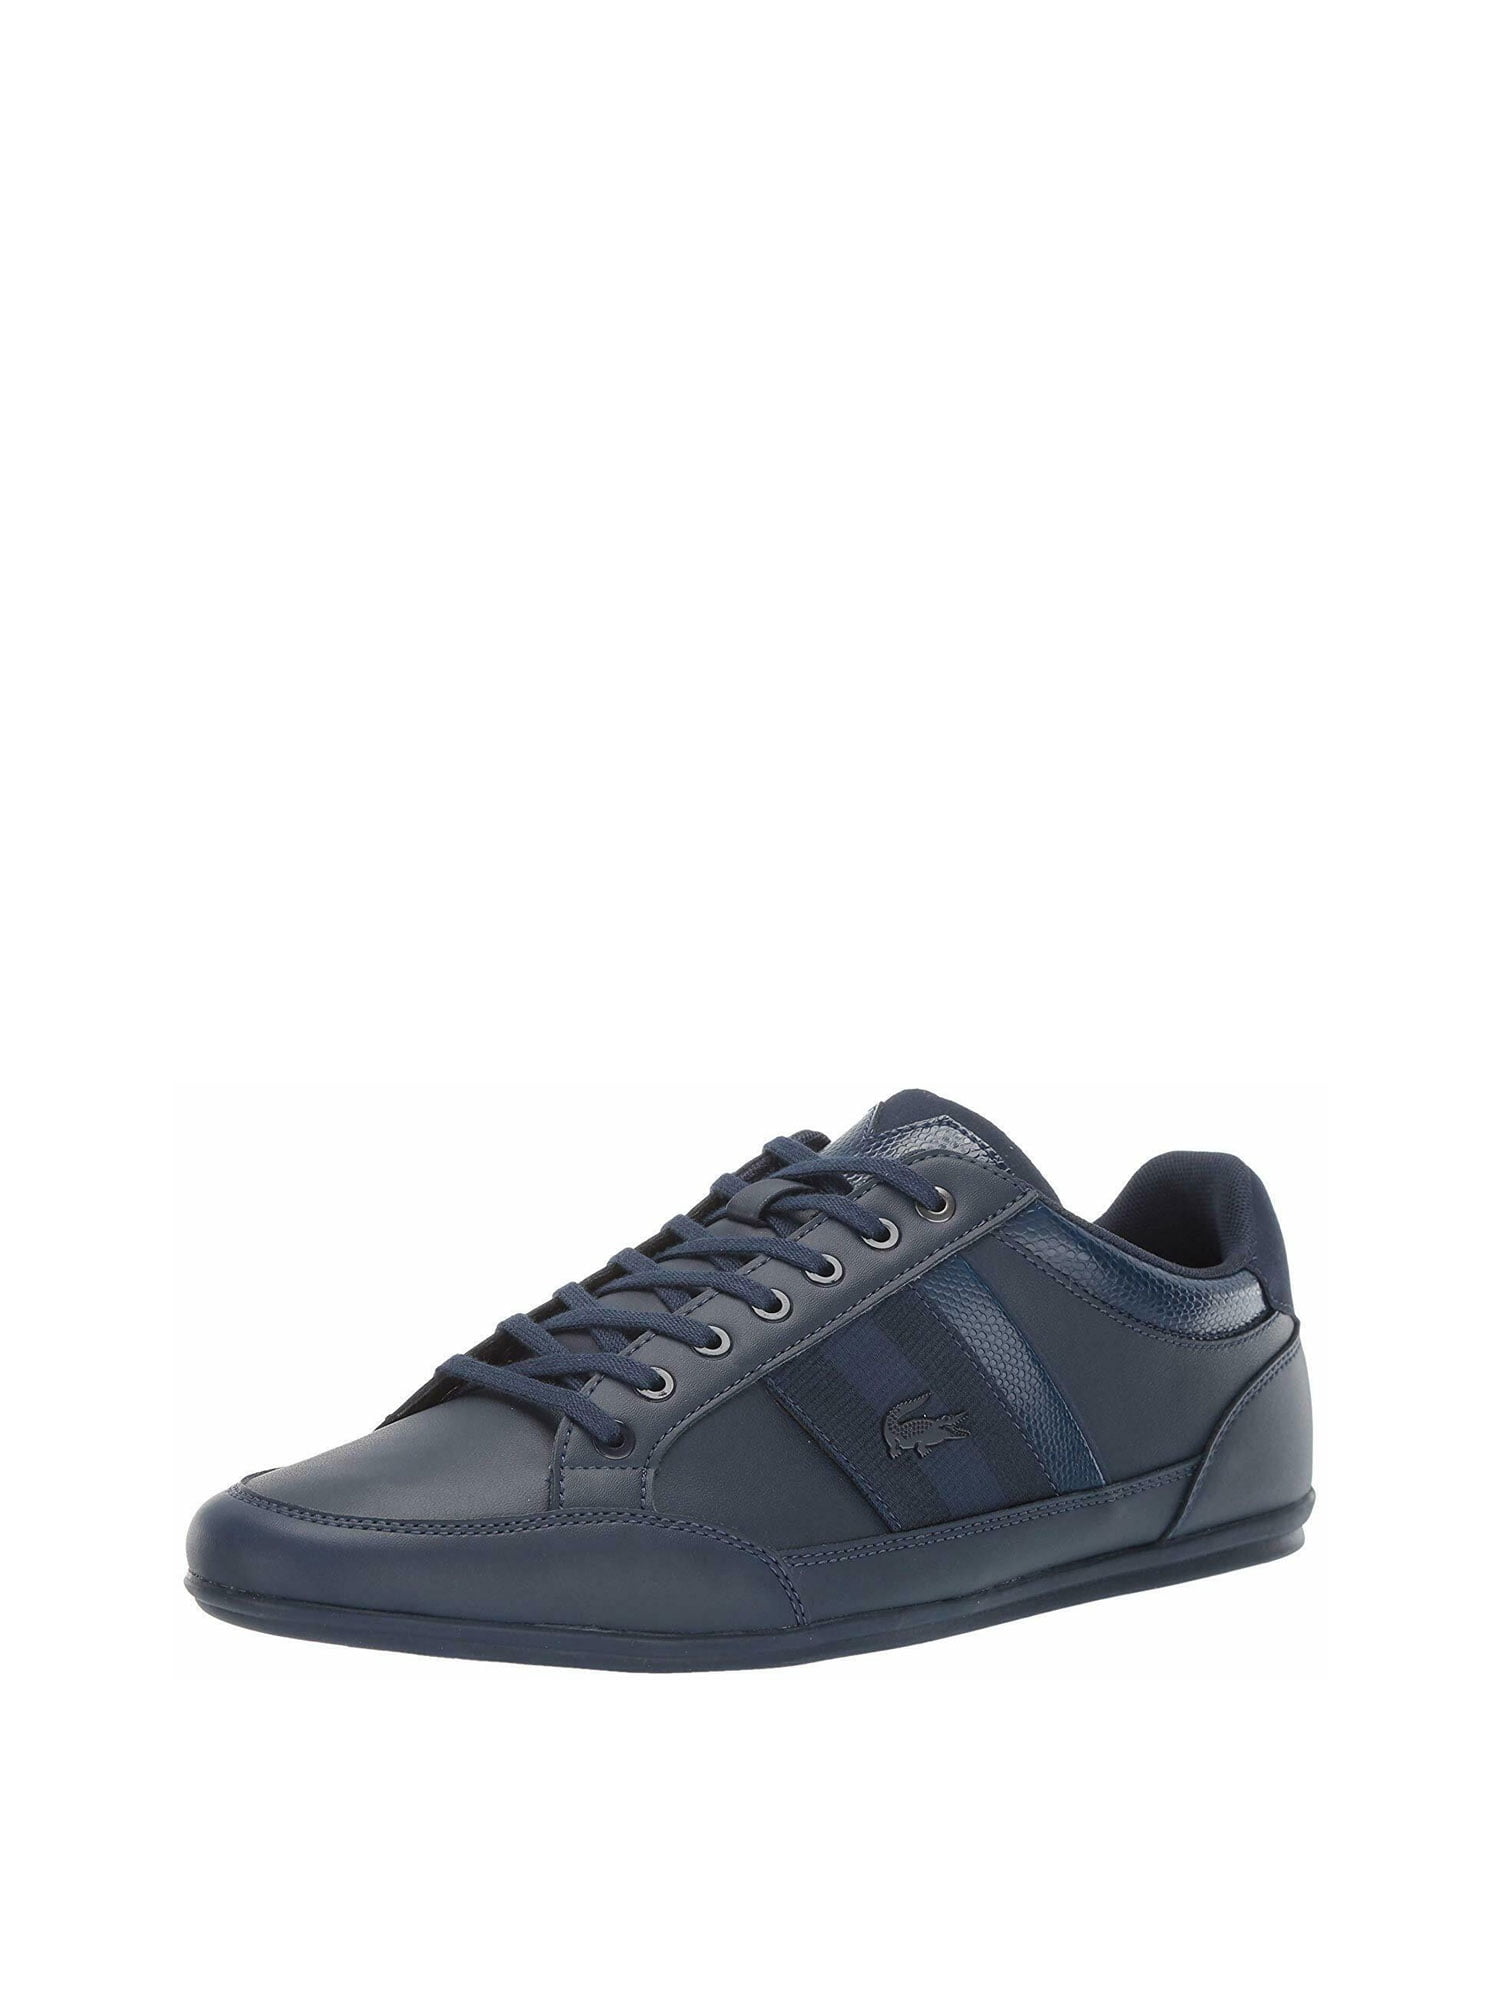 Mens Lacoste Chaymon 119 2 CMA Trainers Navy Lace Up Shoes 